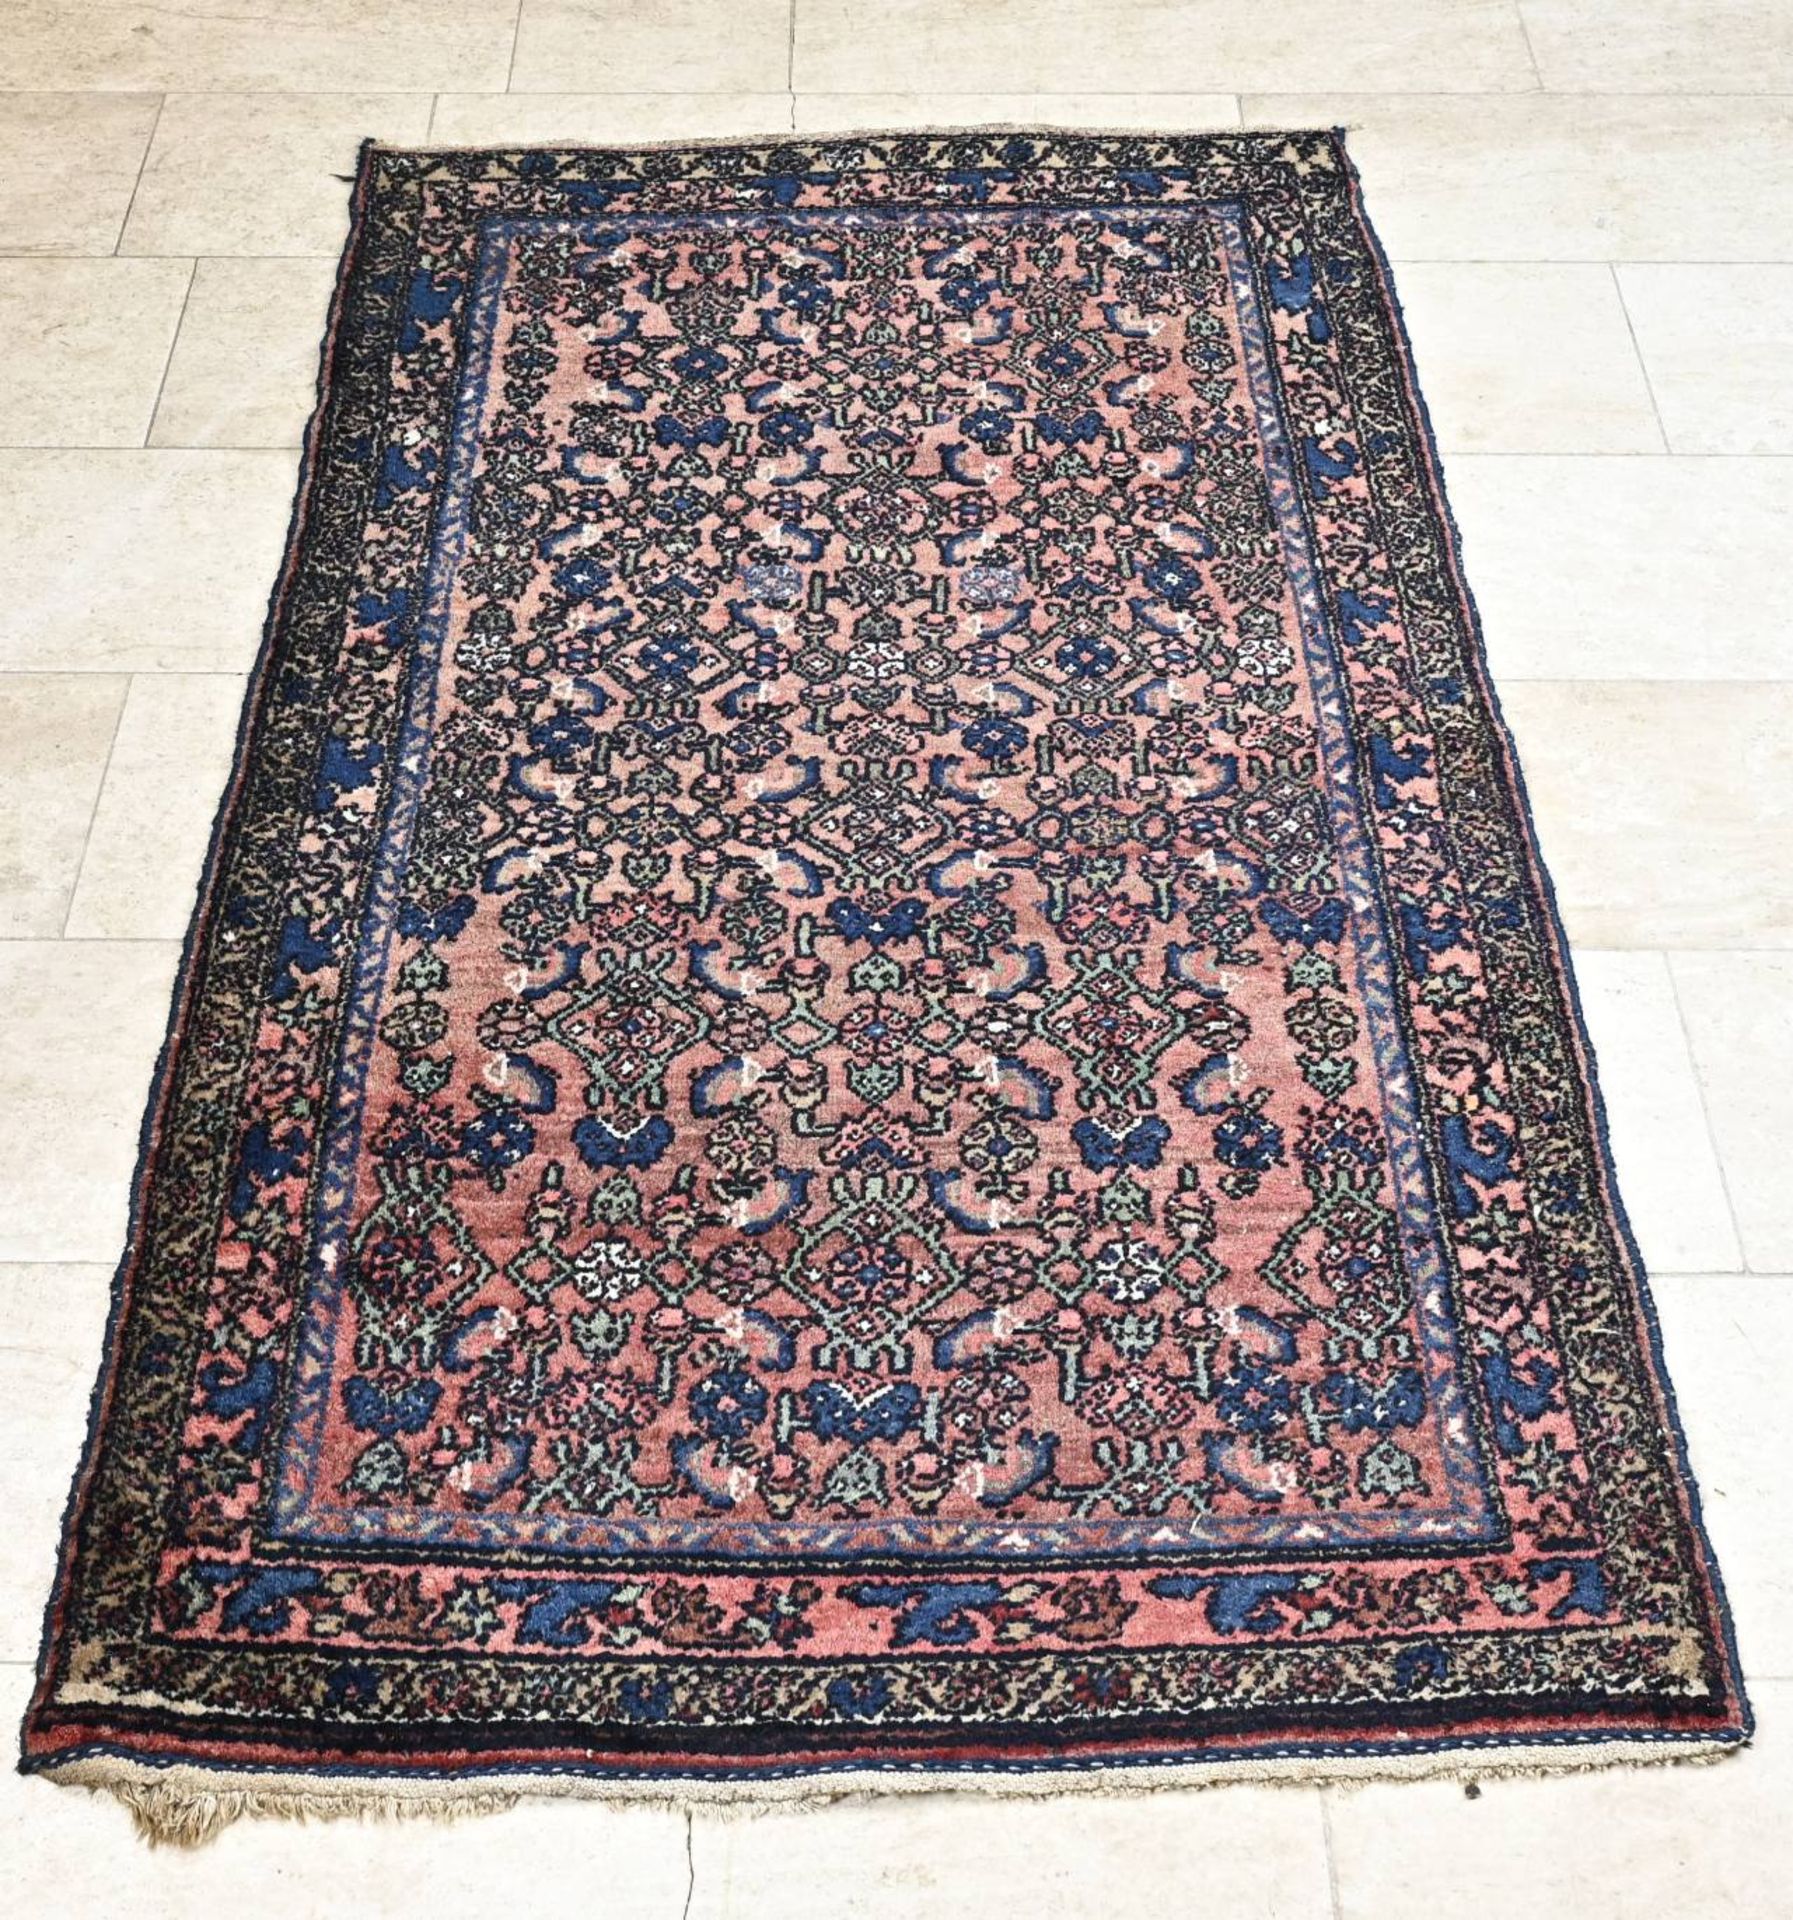 Hand-knotted Persian carpet, 180 x 106 cm.